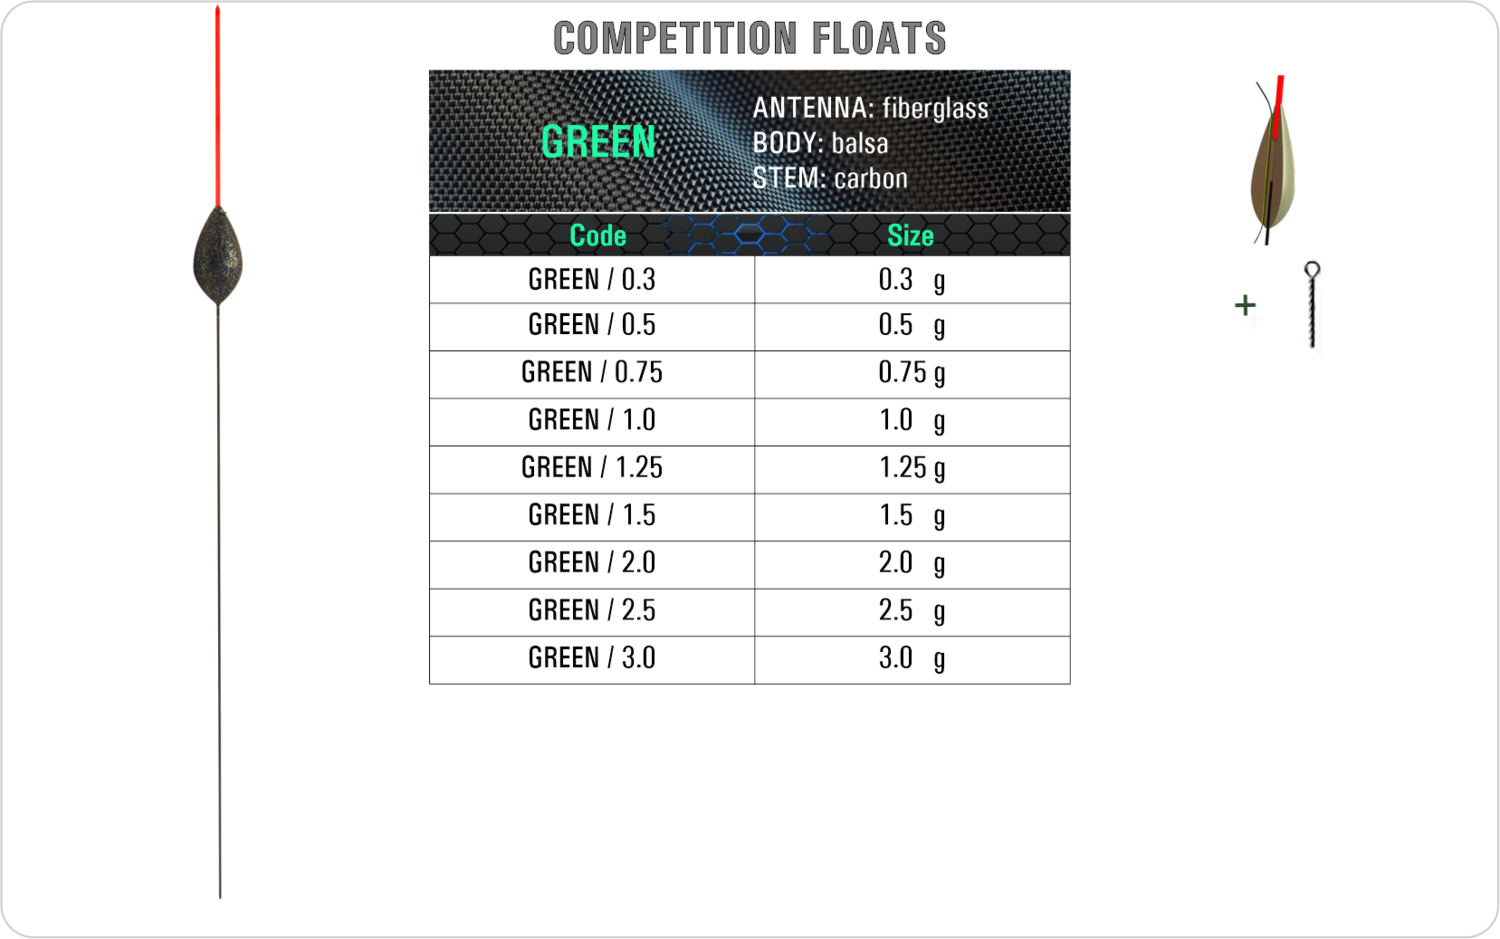 GREEN Competition float model and table containing an additional information about this float with different codes, sizes, types of the body, the stem and the antenna of the float.